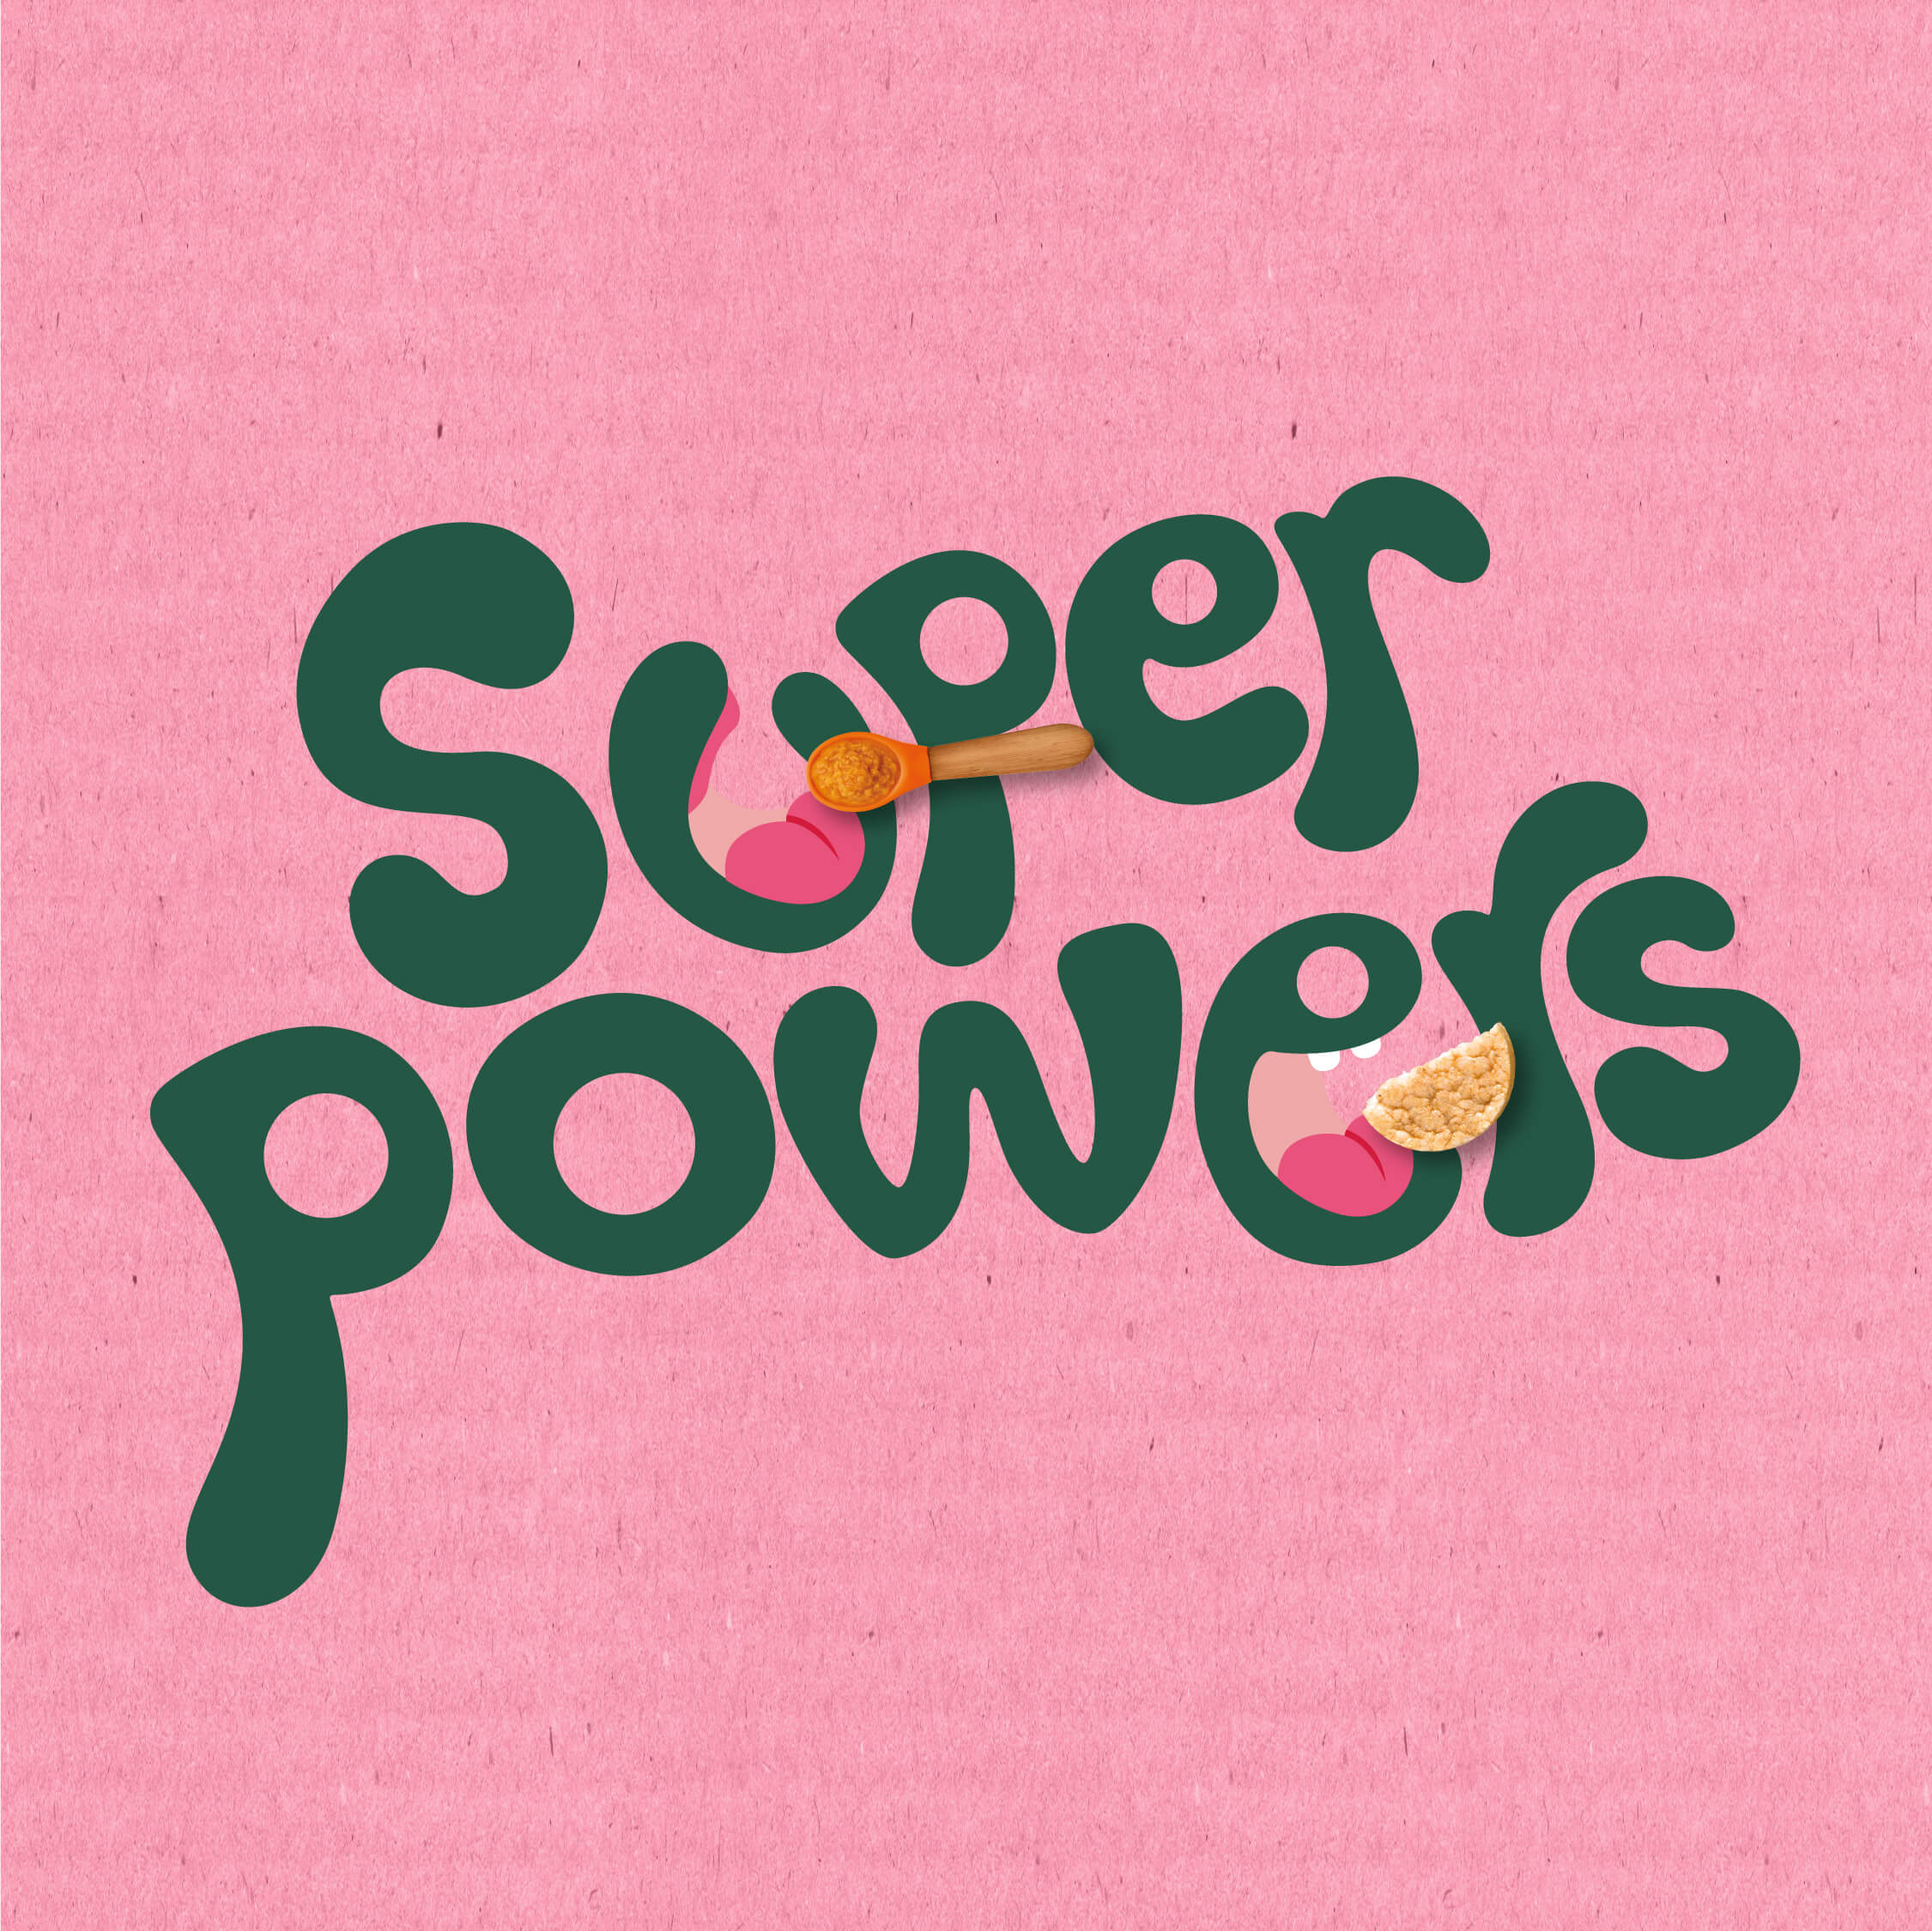 Organix green text that says &quot;super powers&quot; on a pink background